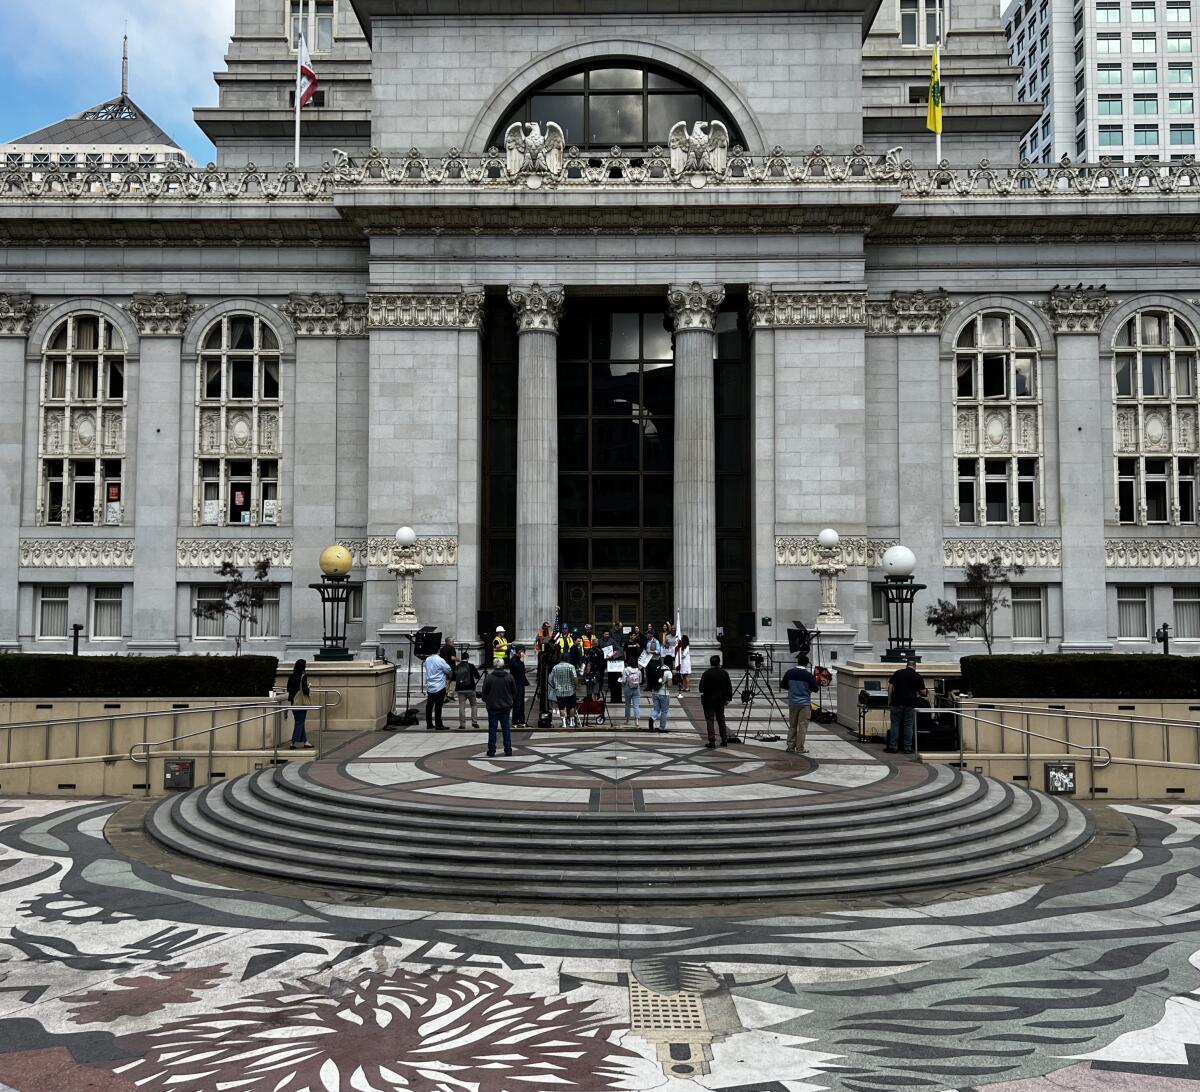 People stand in front of a grand, gray building.